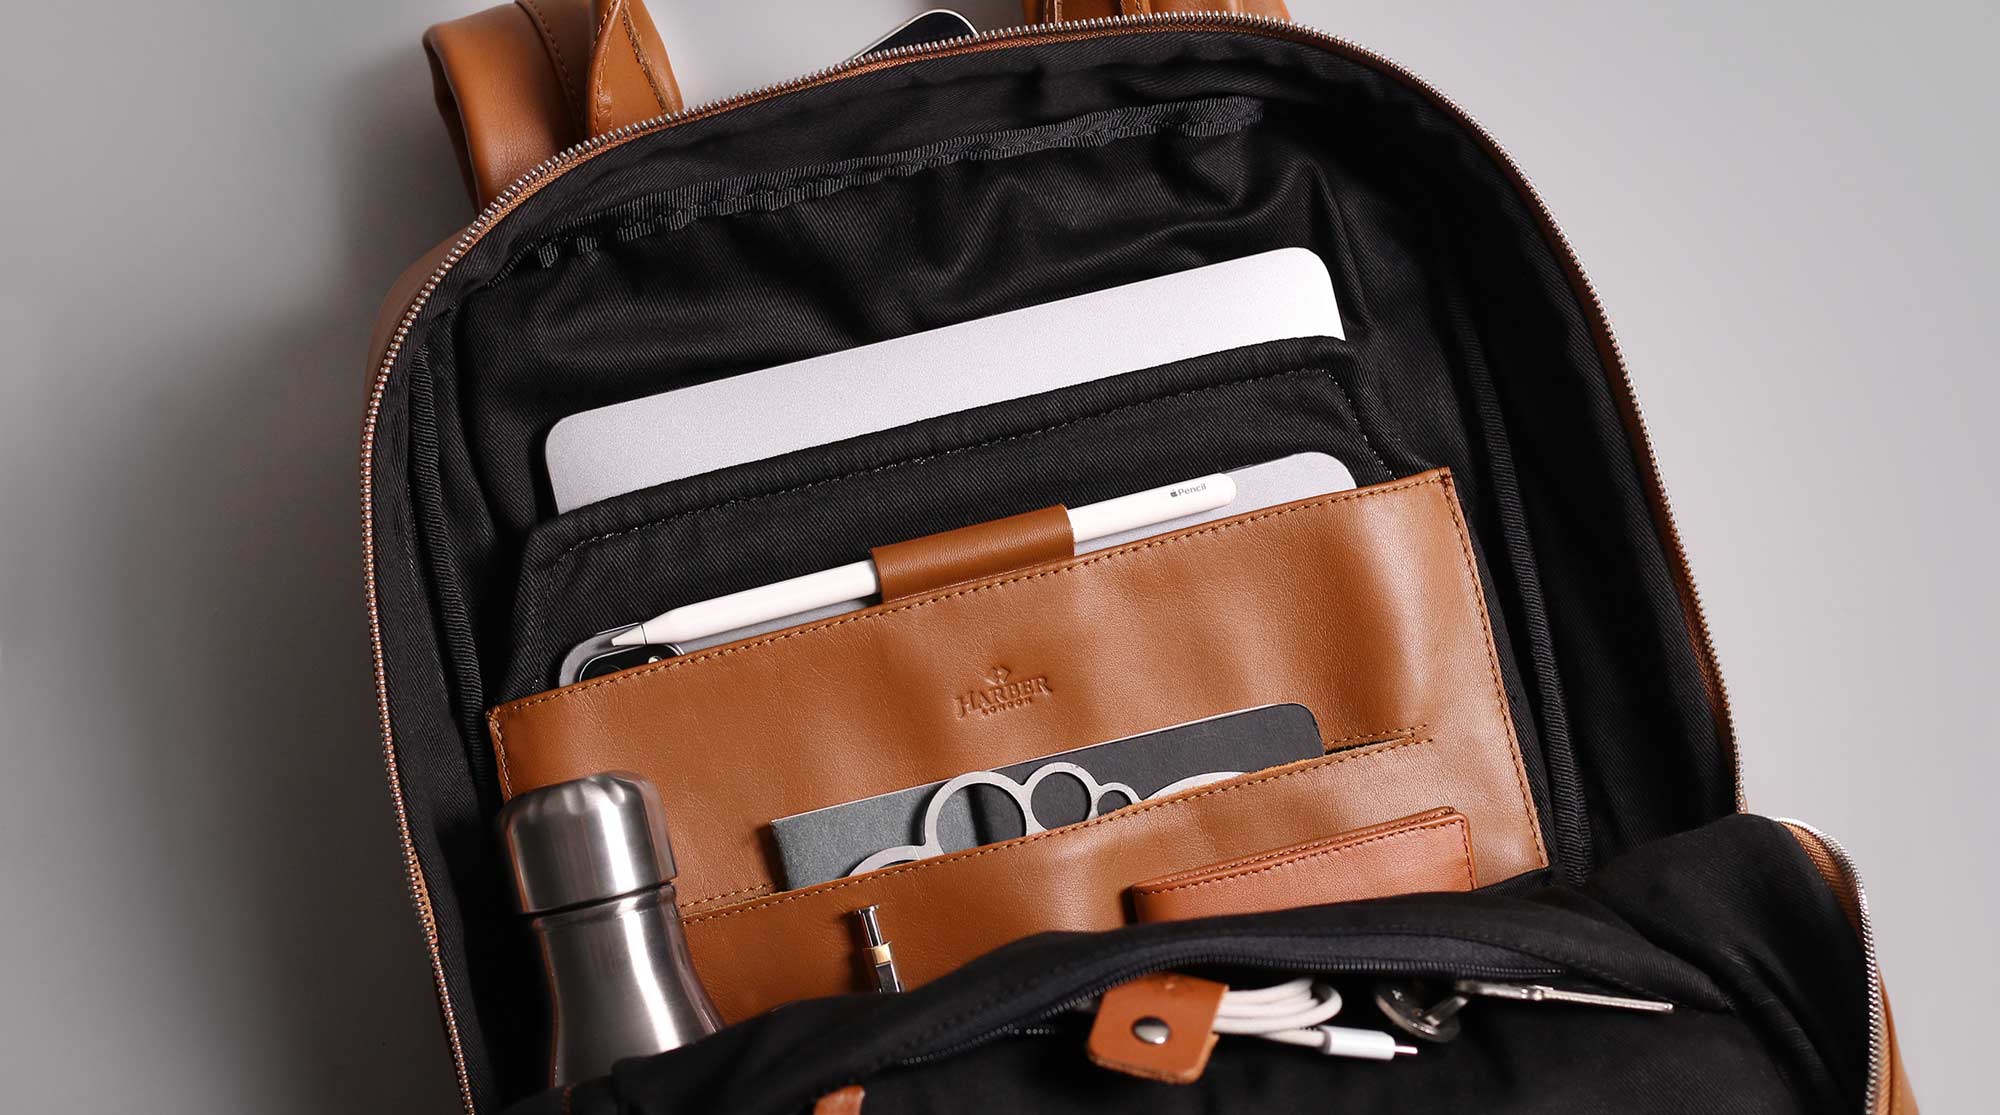 Dedicated padded pockets for laptops, iPad and EDC gear.   